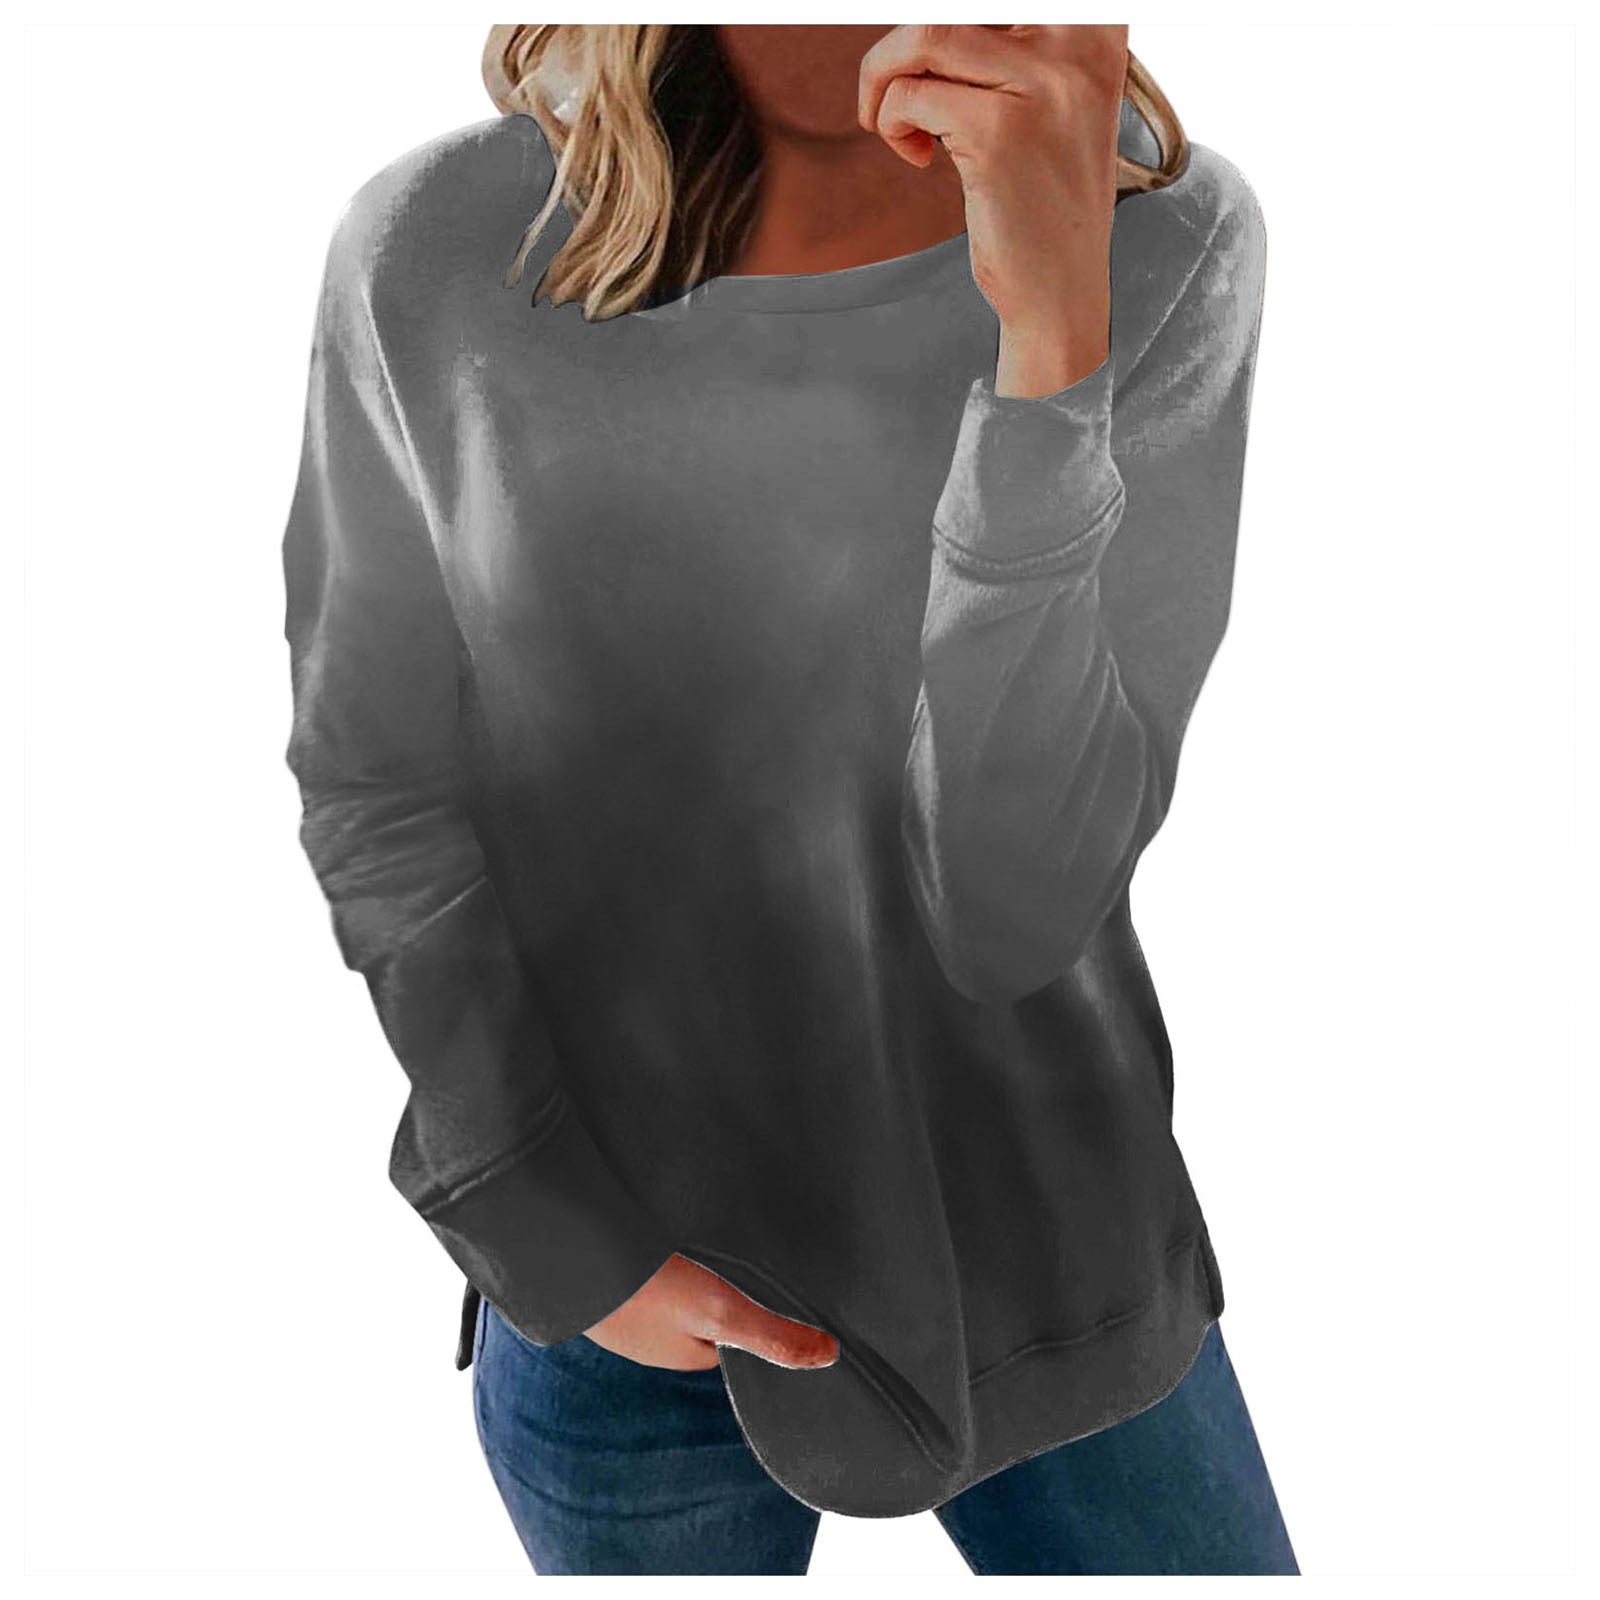 Women's Graceful Spring Round Neck T-shirt Sweaters